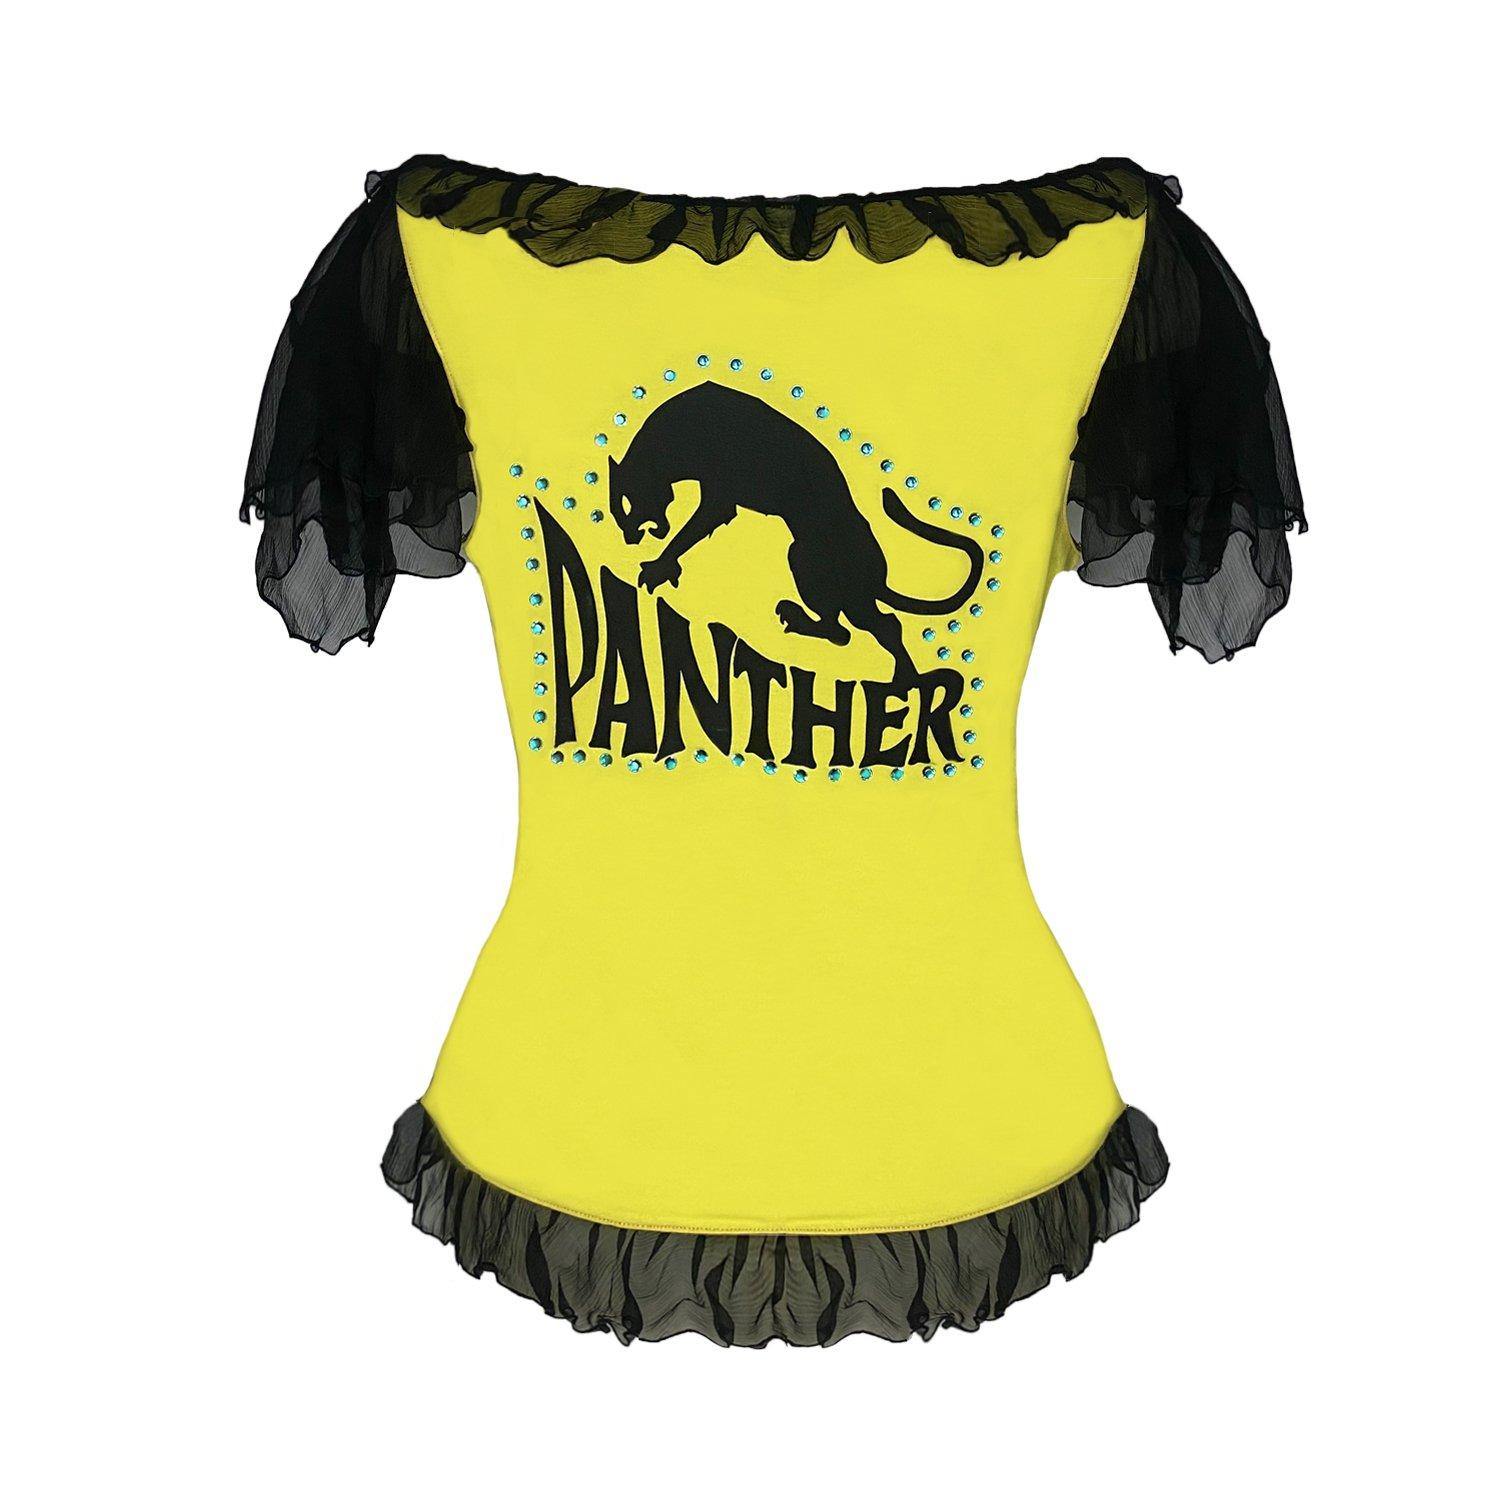 Women's D&G Panther Sheer Front Top